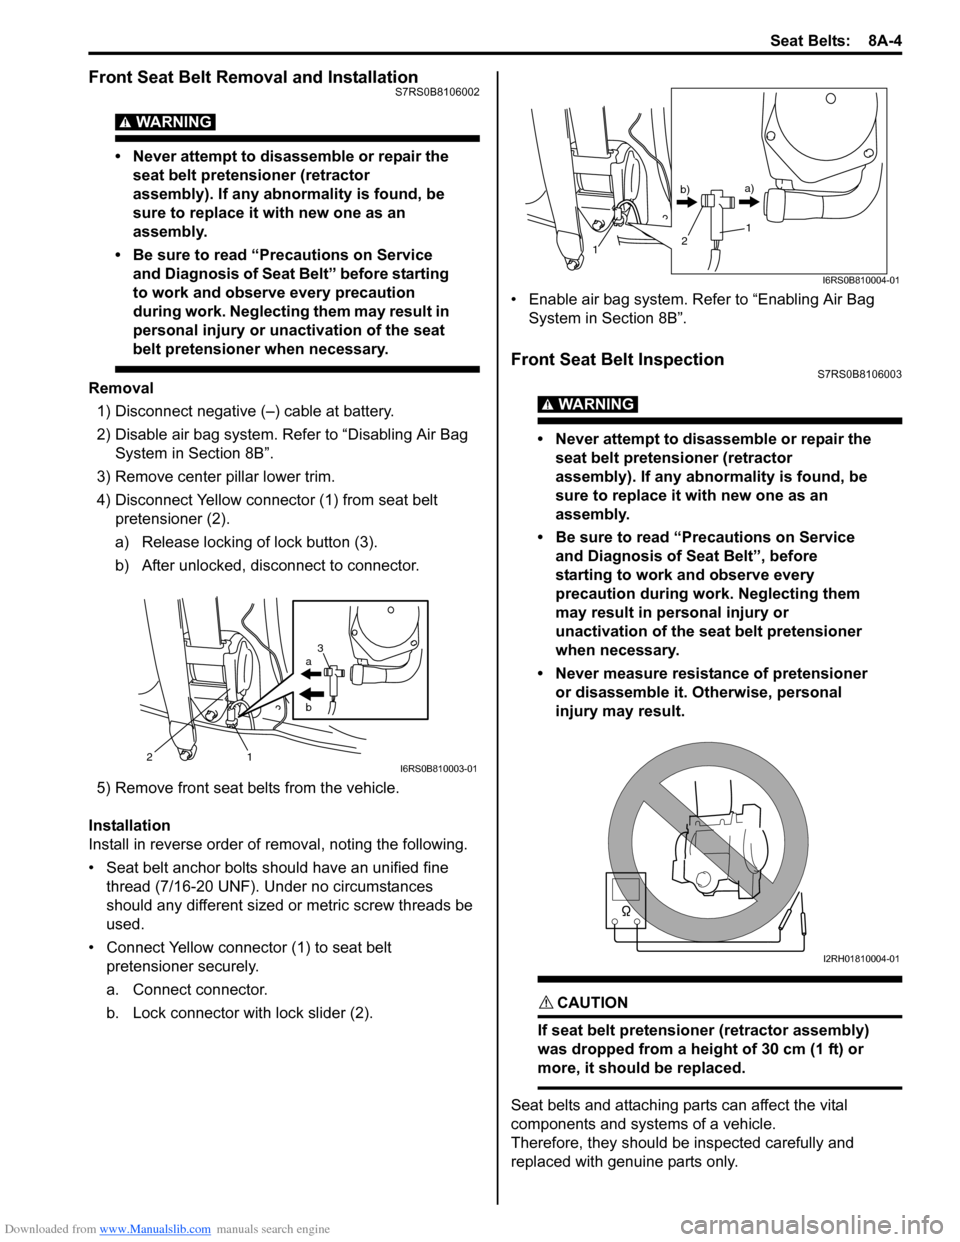 SUZUKI SWIFT 2007 2.G Service Workshop Manual Downloaded from www.Manualslib.com manuals search engine Seat Belts:  8A-4
Front Seat Belt Removal and InstallationS7RS0B8106002
WARNING! 
• Never attempt to disassemble or repair the seat belt pret